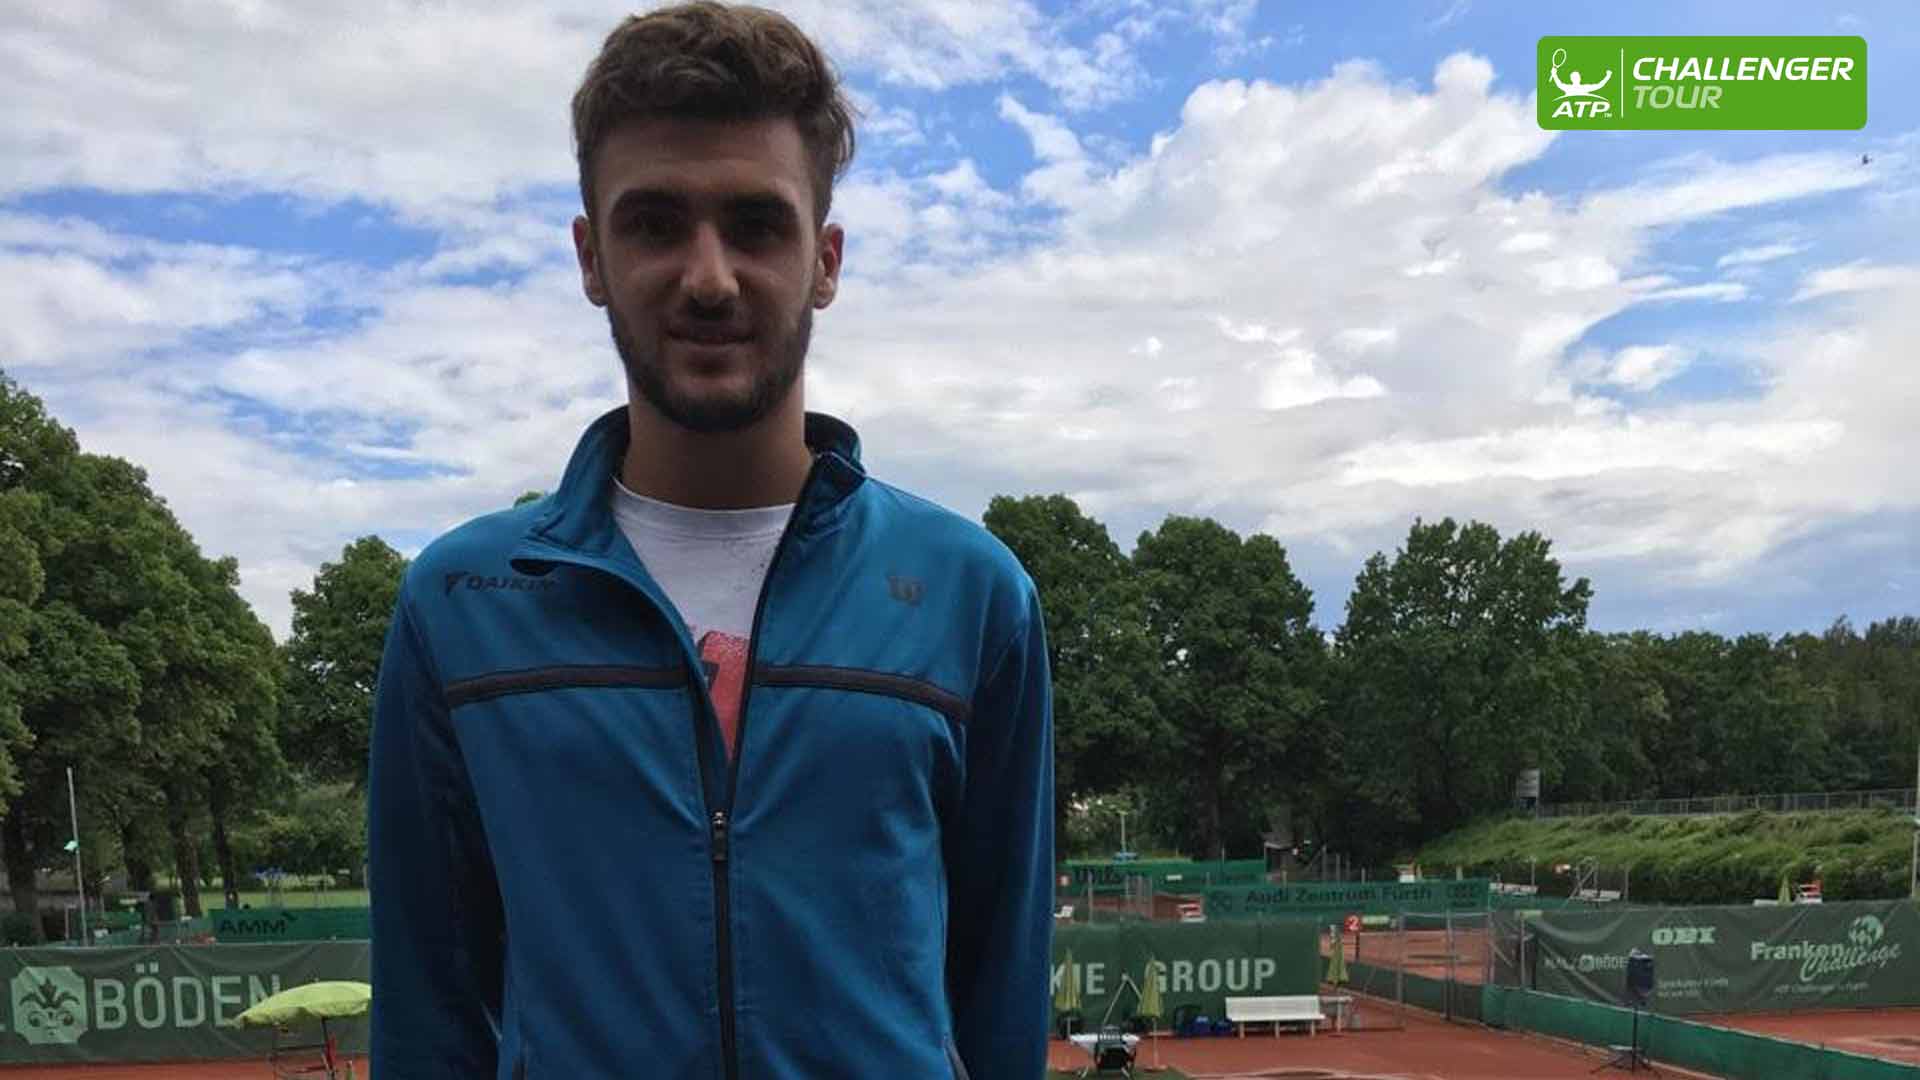 Paul Woerner made his ATP Challenger Tour main draw debut in Furth.